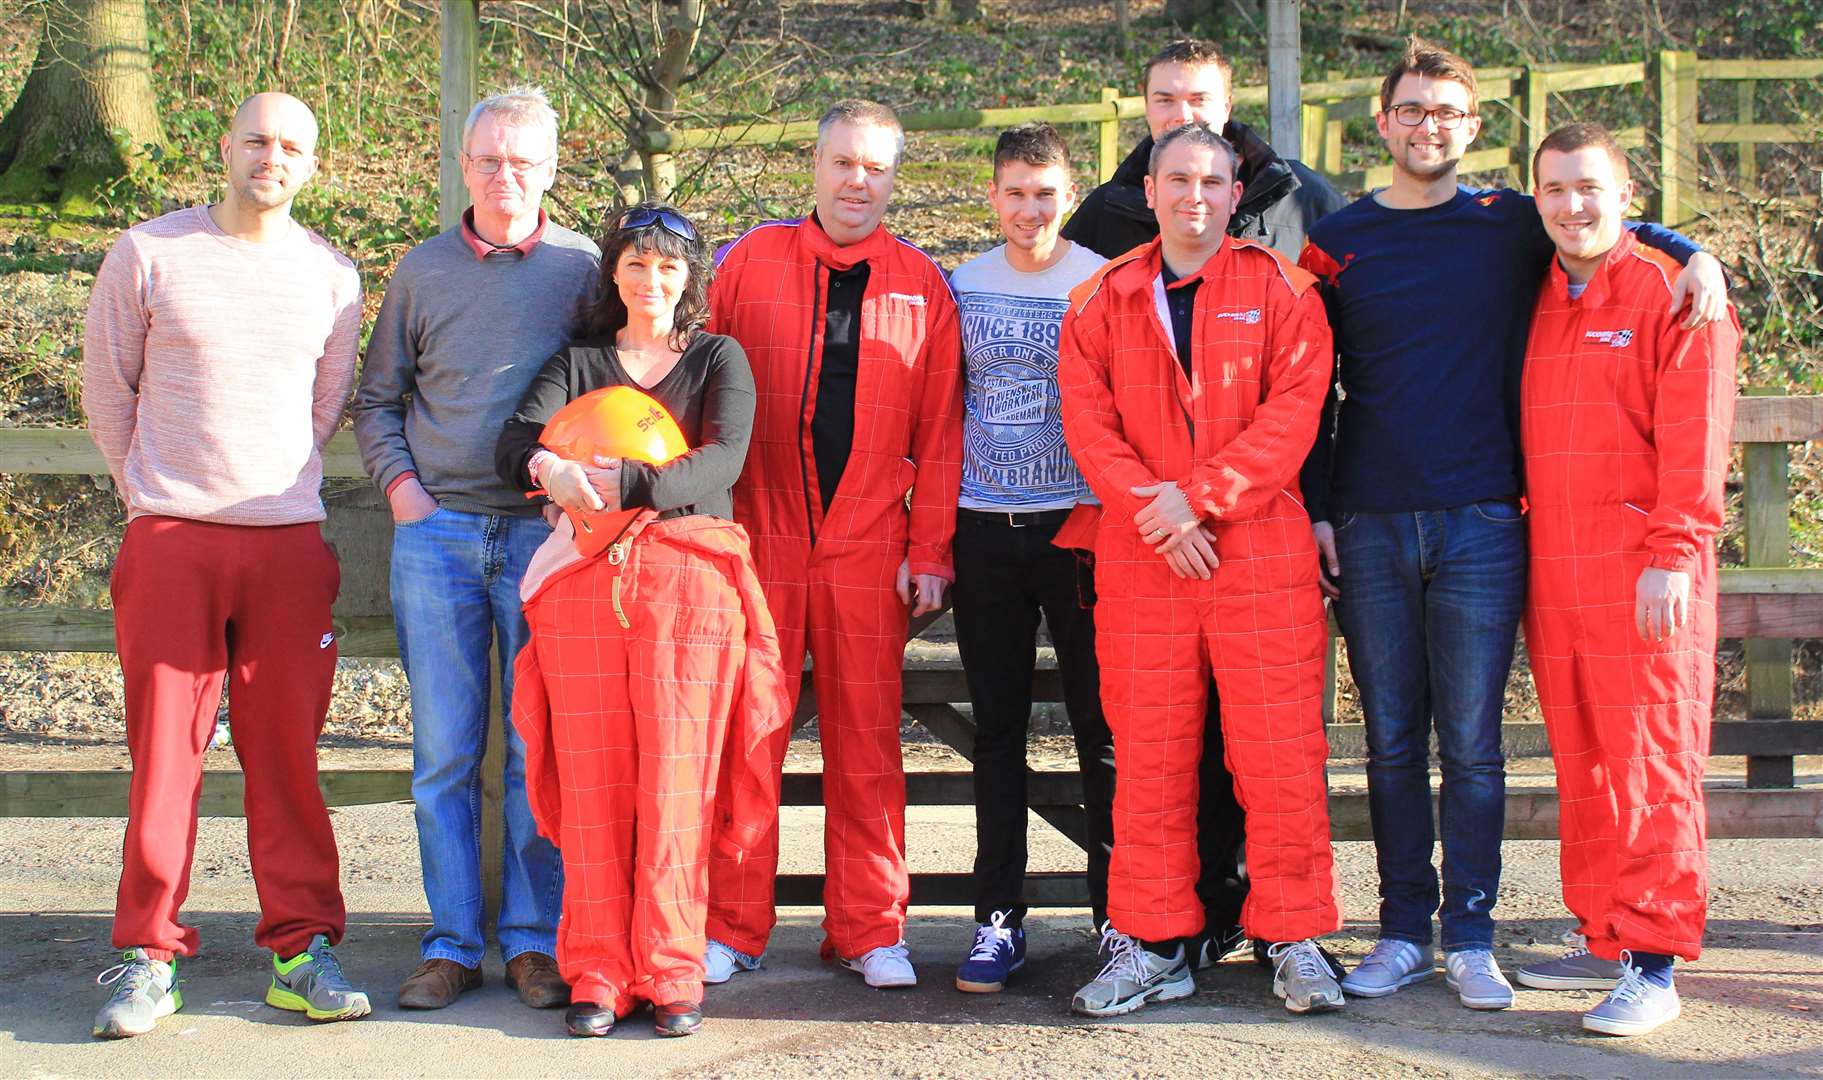 Former Eurotech Racing team members at Buckmore in 2014 with 1992 European Rallycross champion Will Gollop and Martin and Julie Lawford. Picture: Joe Wright